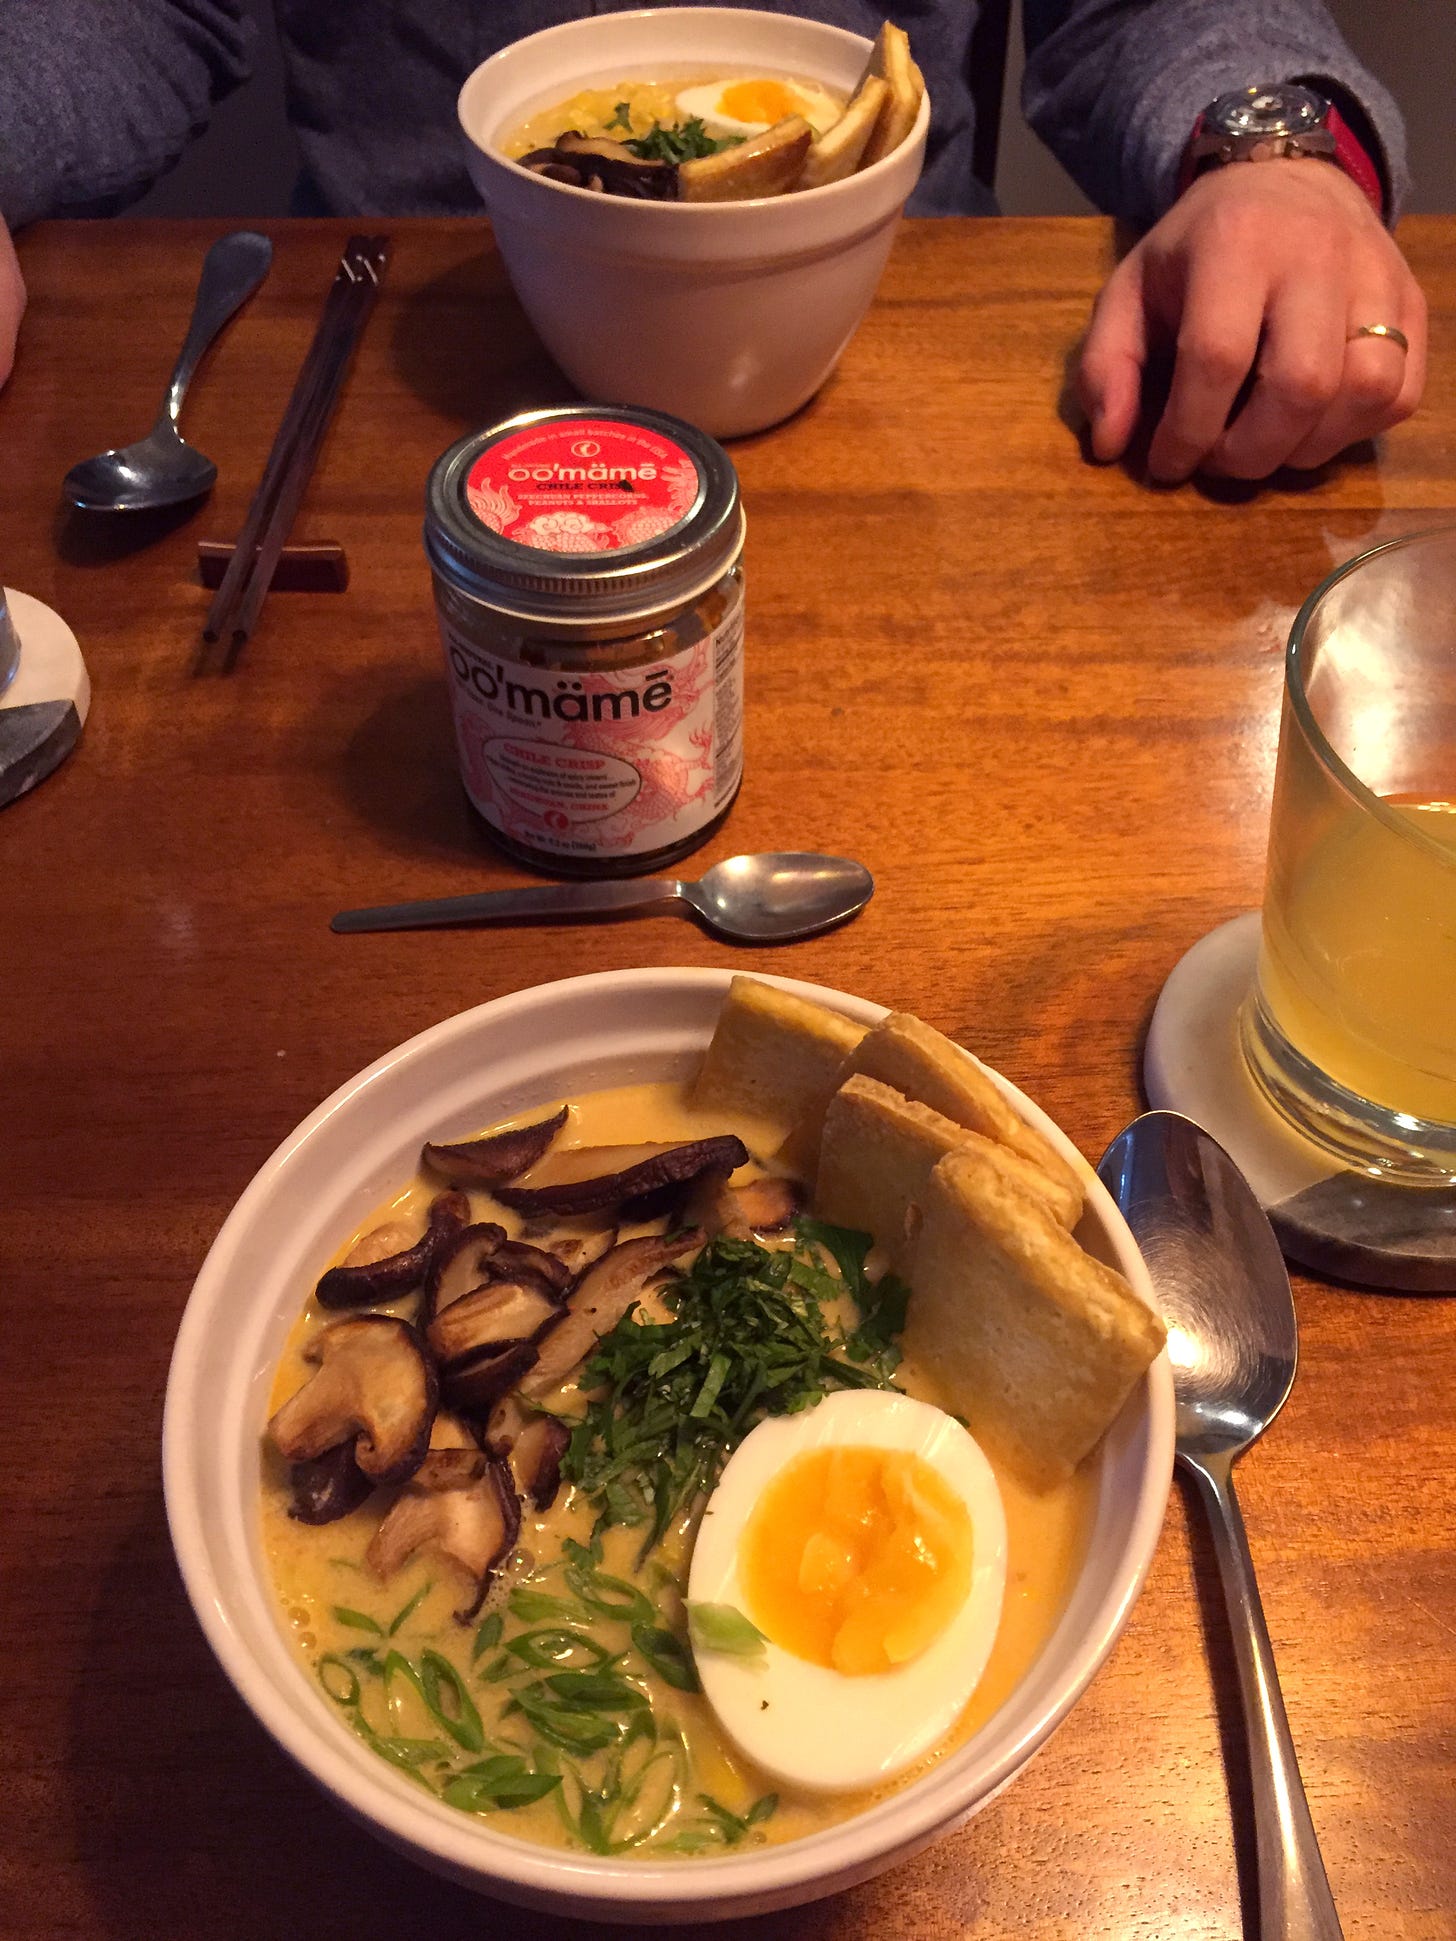 Two bowls of ramen across from each other on the table, with a jar of chili crisp in the middle. In each bowl are slices of tofu, fried shiitake mushrooms, green onions, corn, and half a soft-boiled egg.